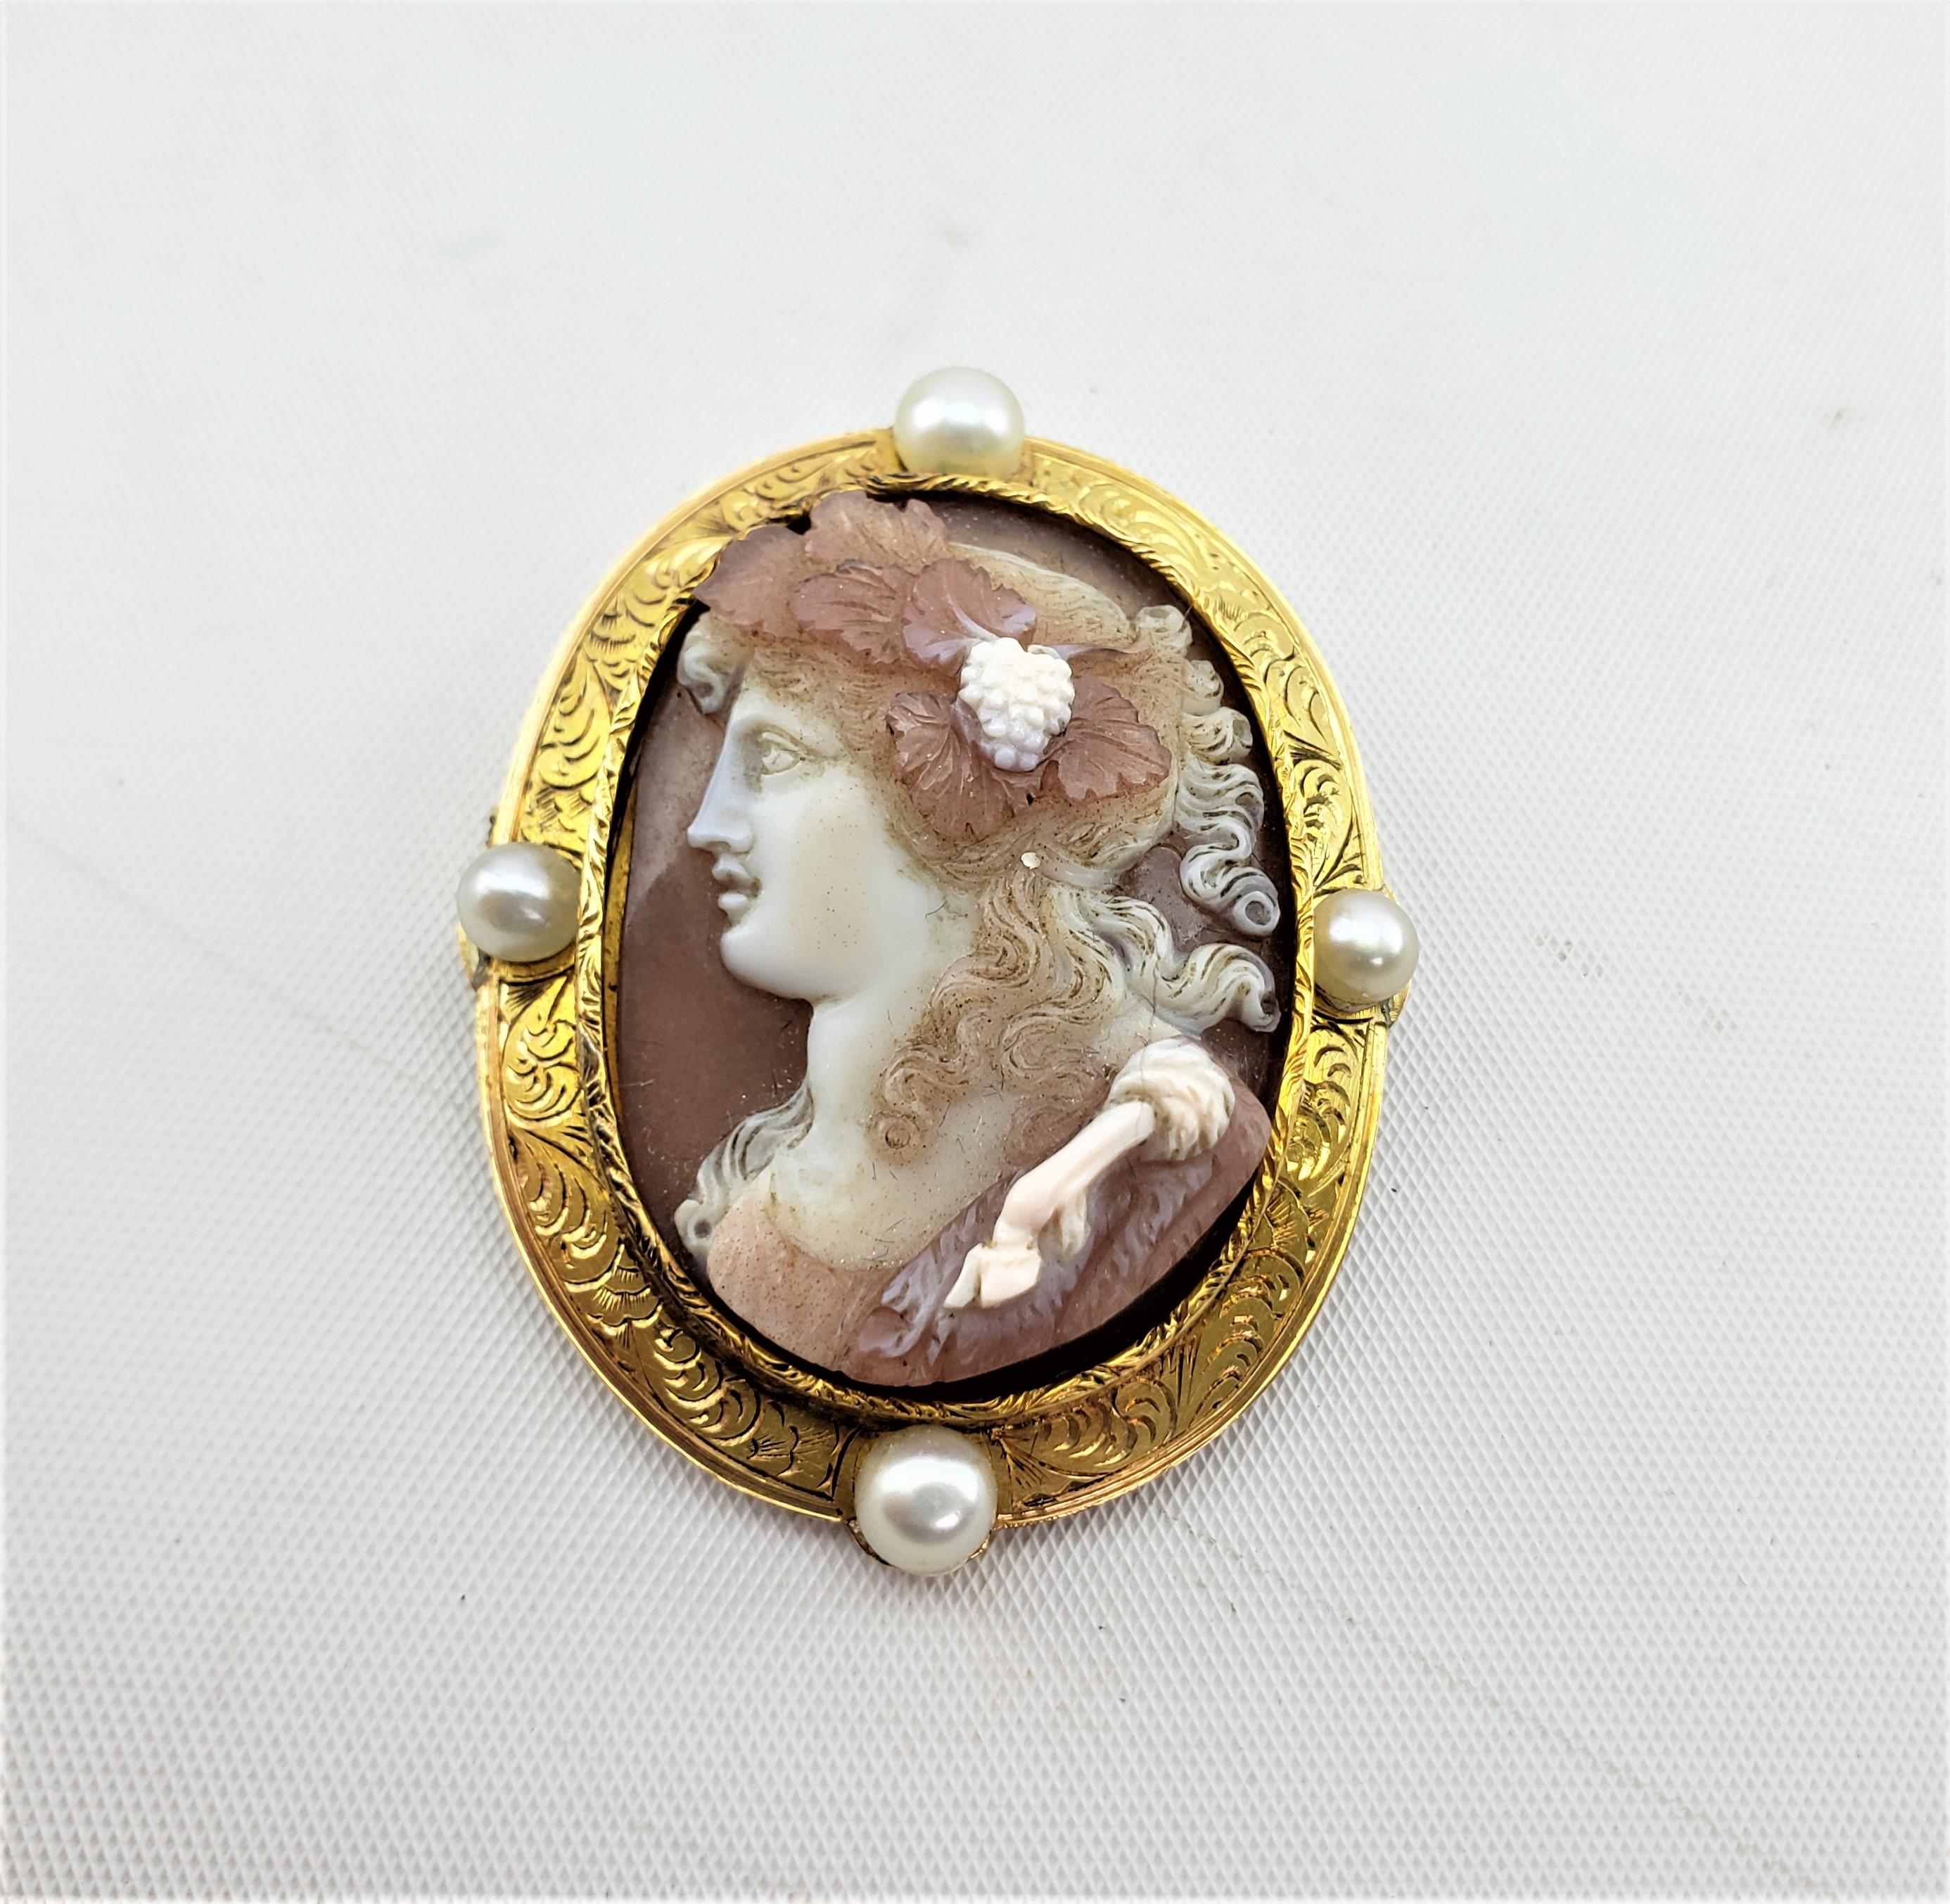 Antique 18 Karat Engraved Yellow Gold & Hand-Carved Hardstone Cameo Brooch 7